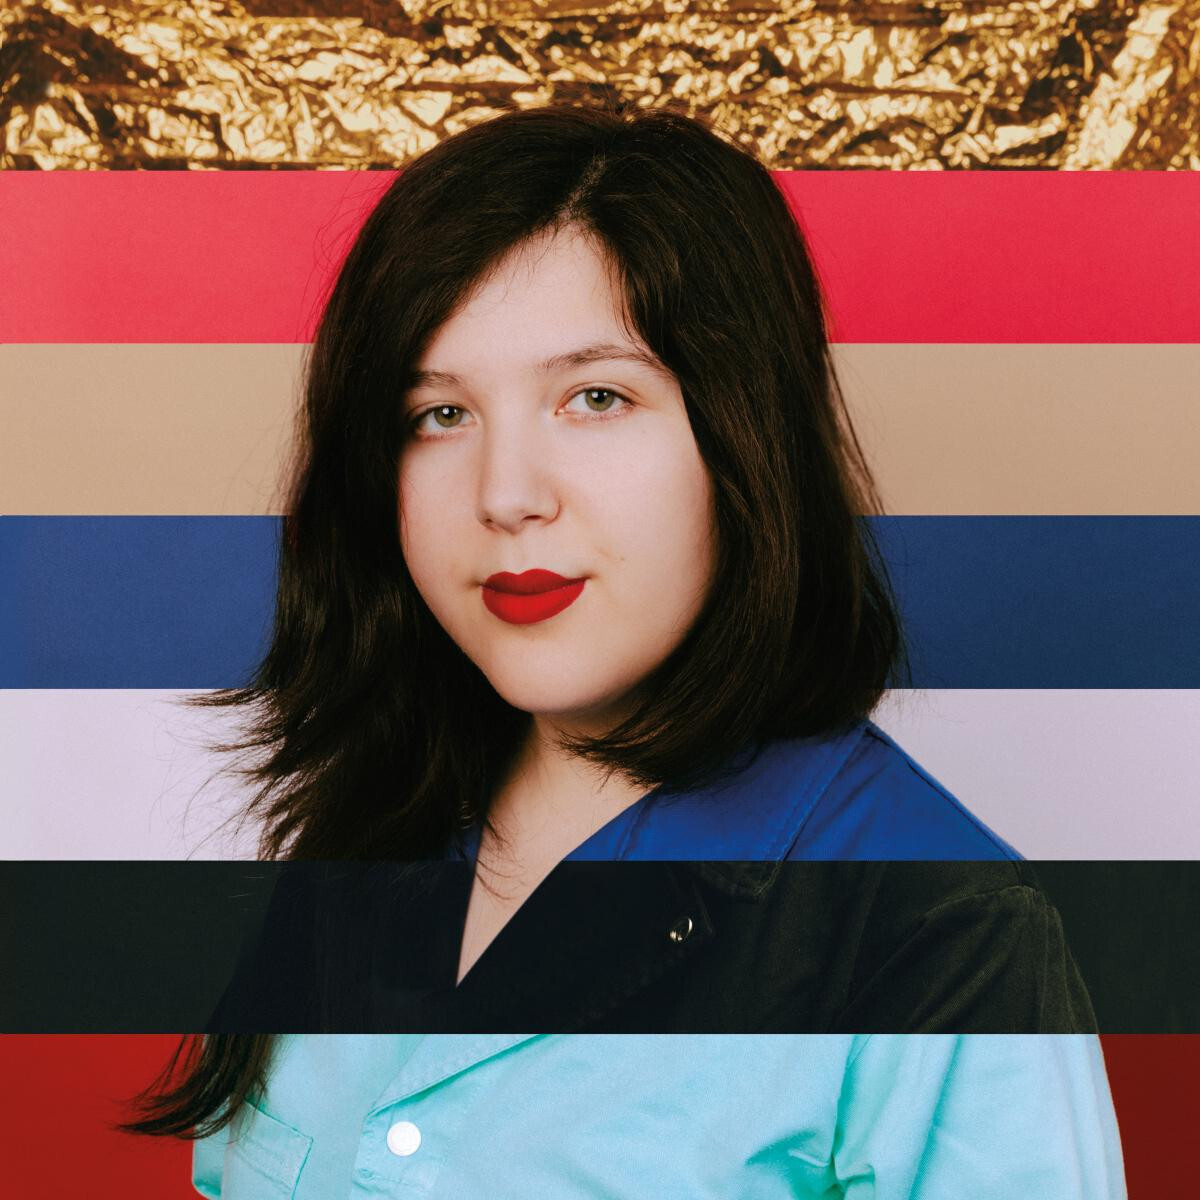 Lucy Dacus "2019"